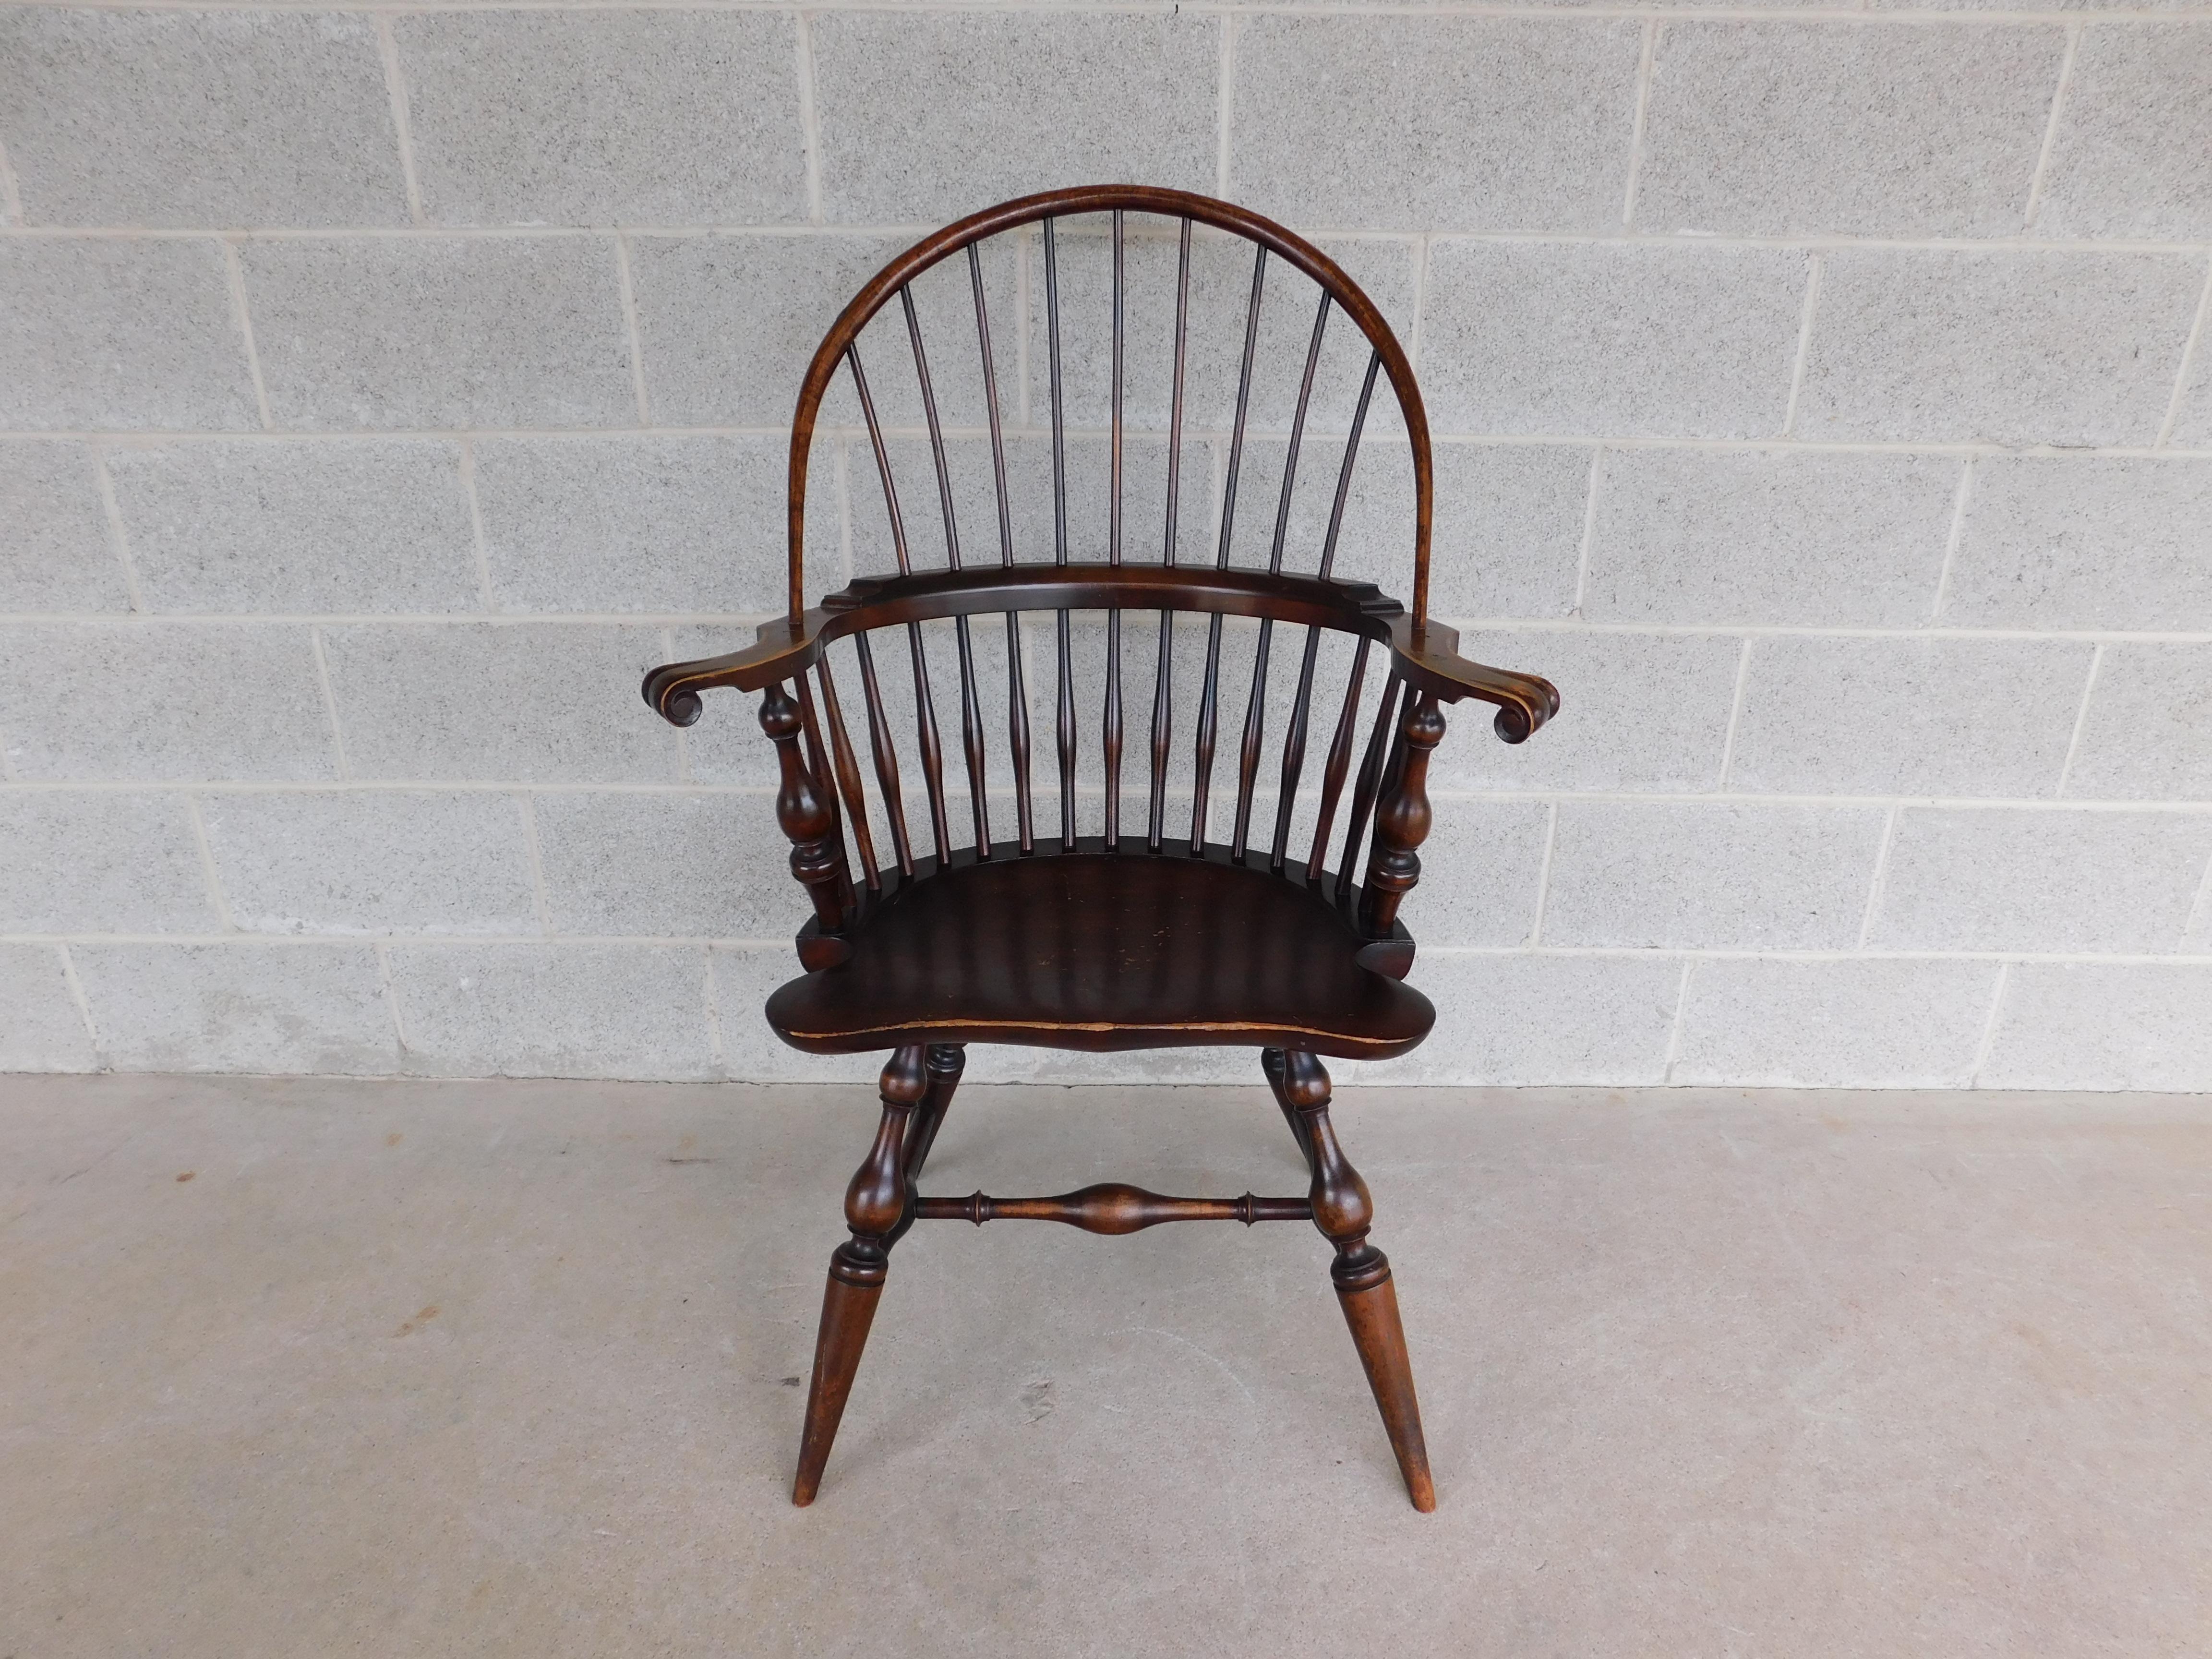 Wallace Nutting #420 Bow Back Windsor Arm Chair

Circa 1900 - 1925 Original Finish and Paper Label

Turned Legs, Various Hardwoods Used, and Pine. Sturdy Construction 
( Hickory, Maple, and Pine )

Back Height 41.5